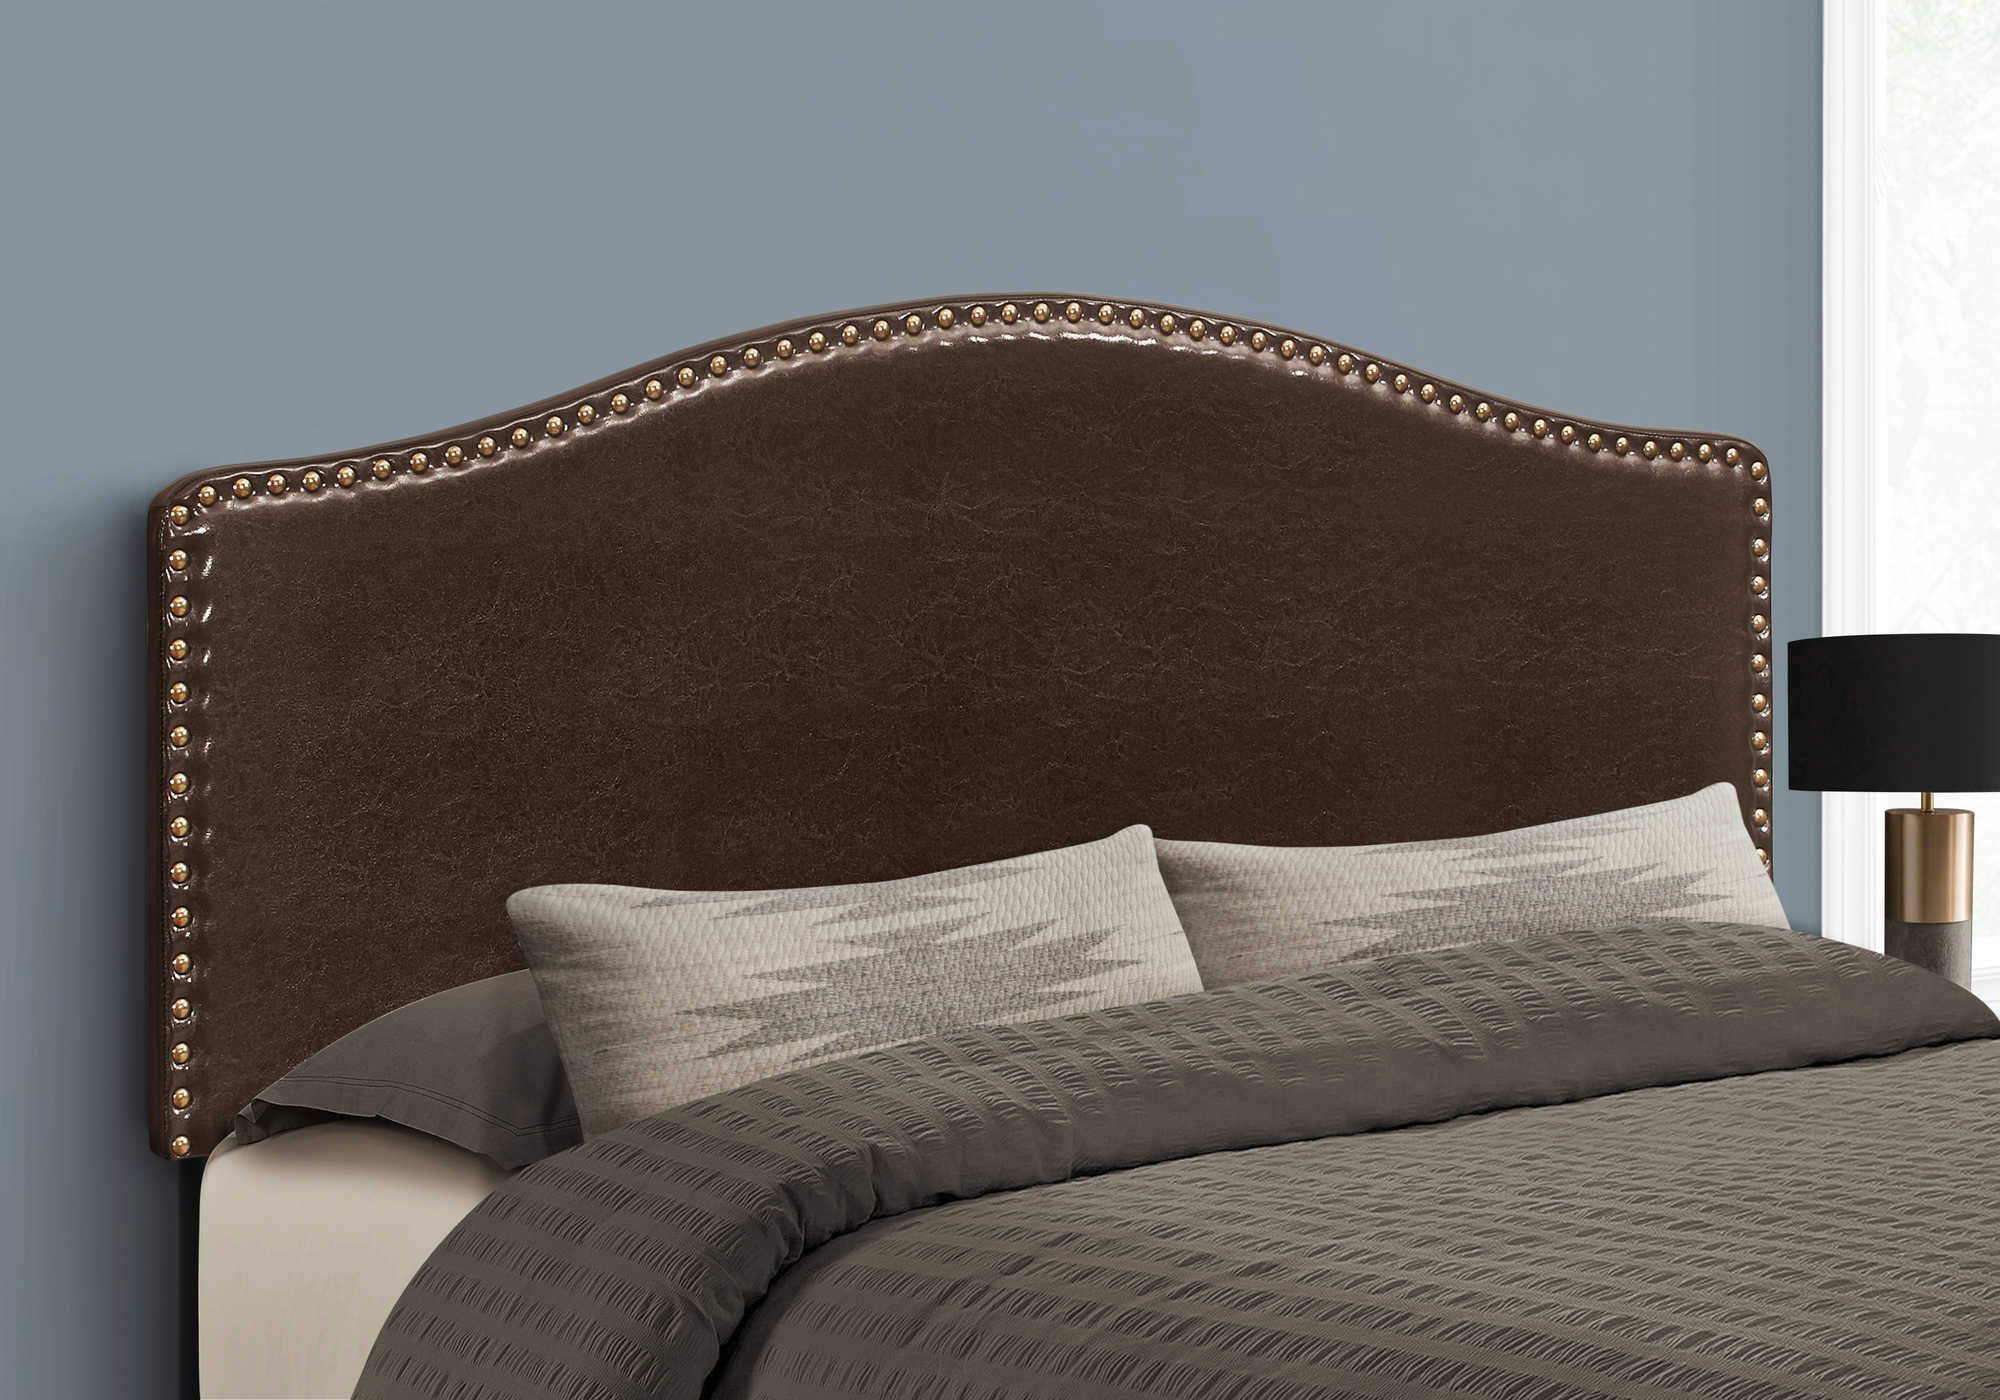 BED - QUEEN SIZE / BROWN LEATHER-LOOK HEADBOARD ONLY